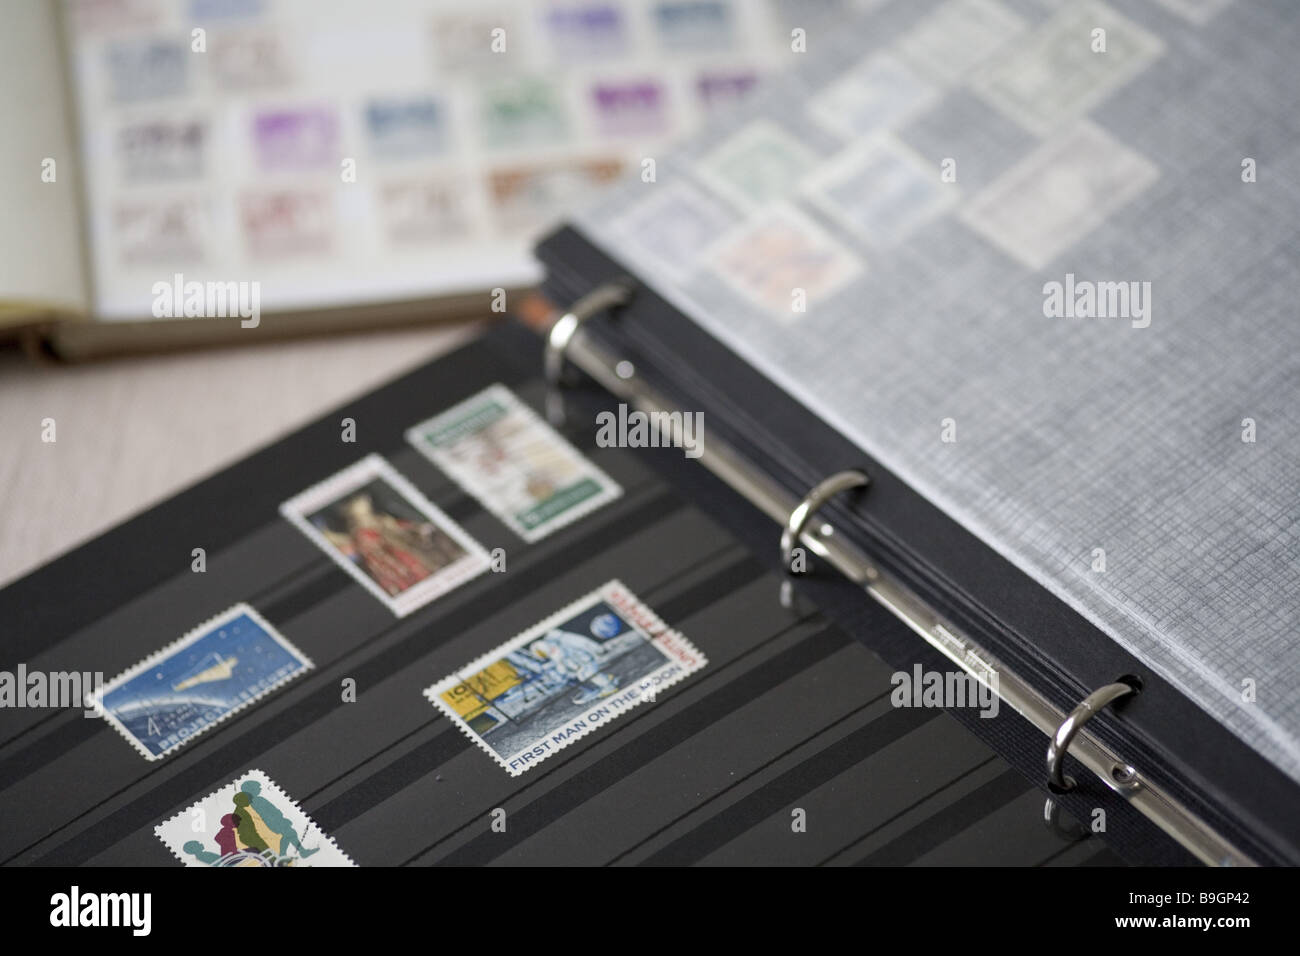 Stamp-album stamps philately collect hobby Stock Photo